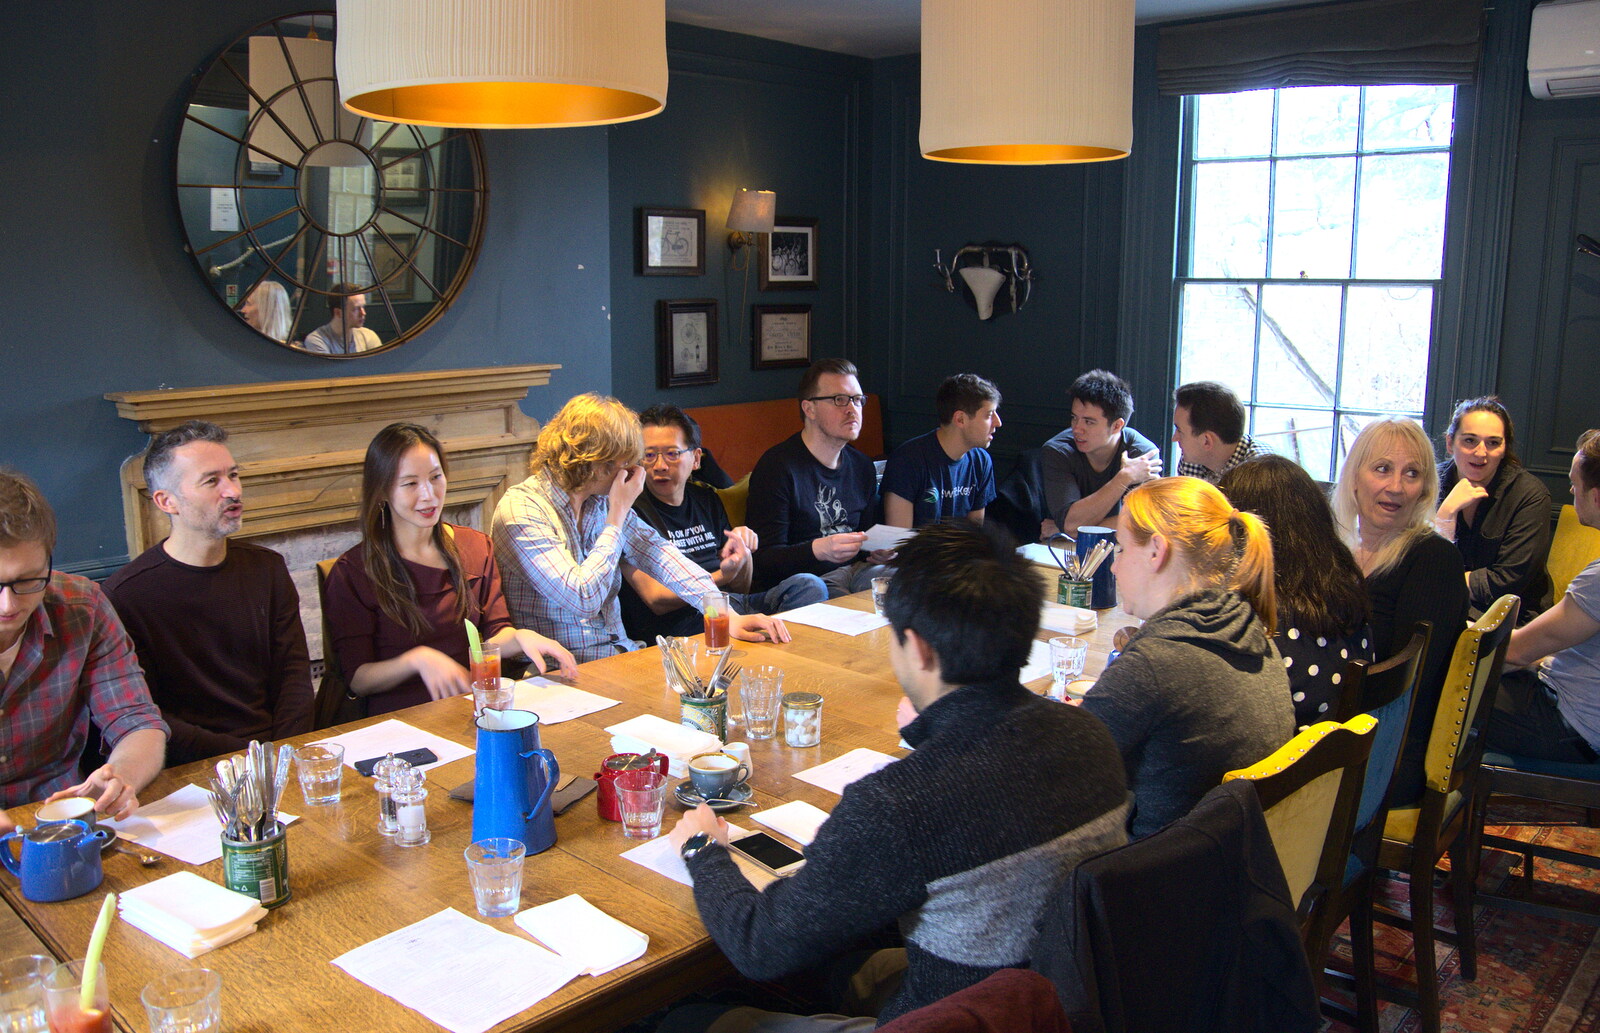 The crowded upstairs room from The SwiftKey Reunion Brunch, Regent Street, Cambridge - 12th January 2019